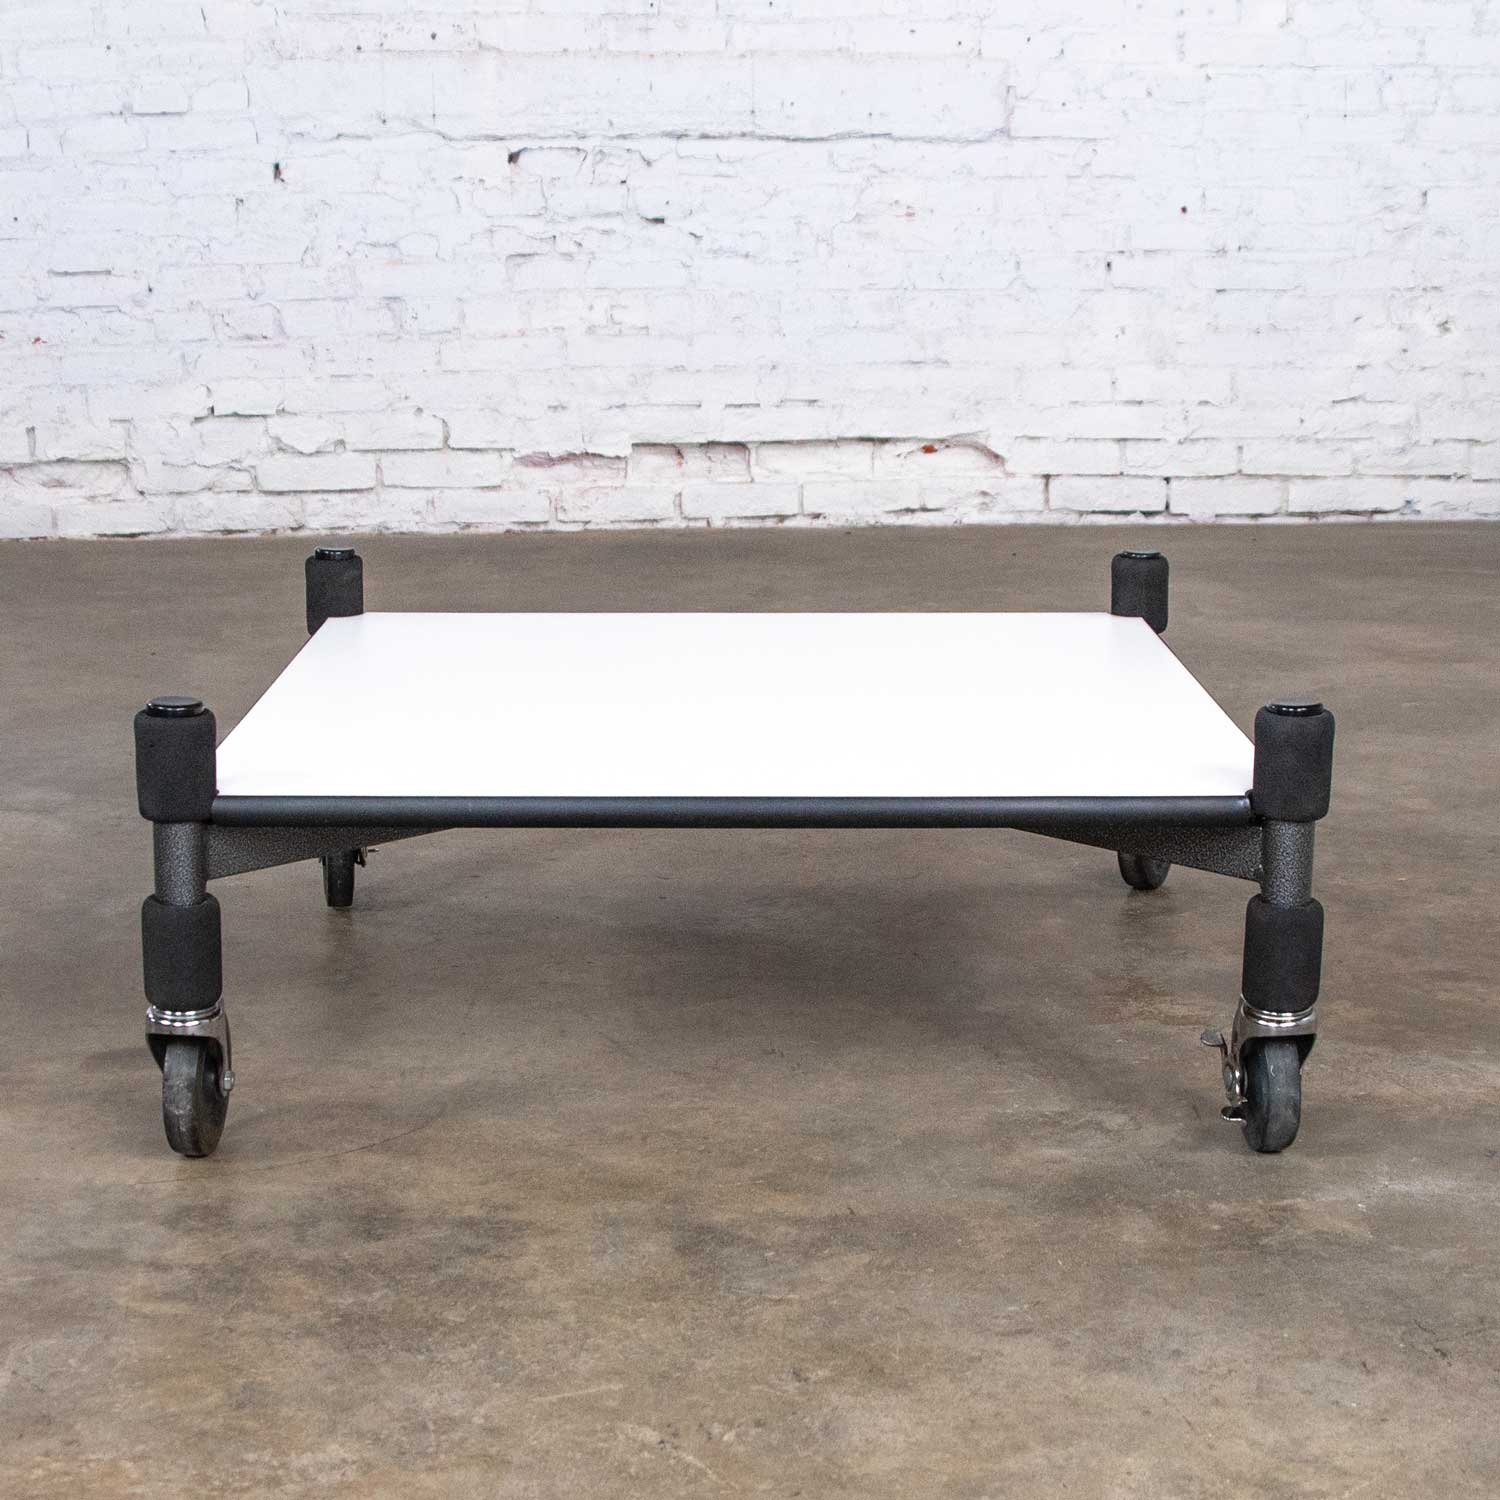 Post-Modern White Laminate & Metal Low Coffee Table or End Table on Casters Style Brian Kane